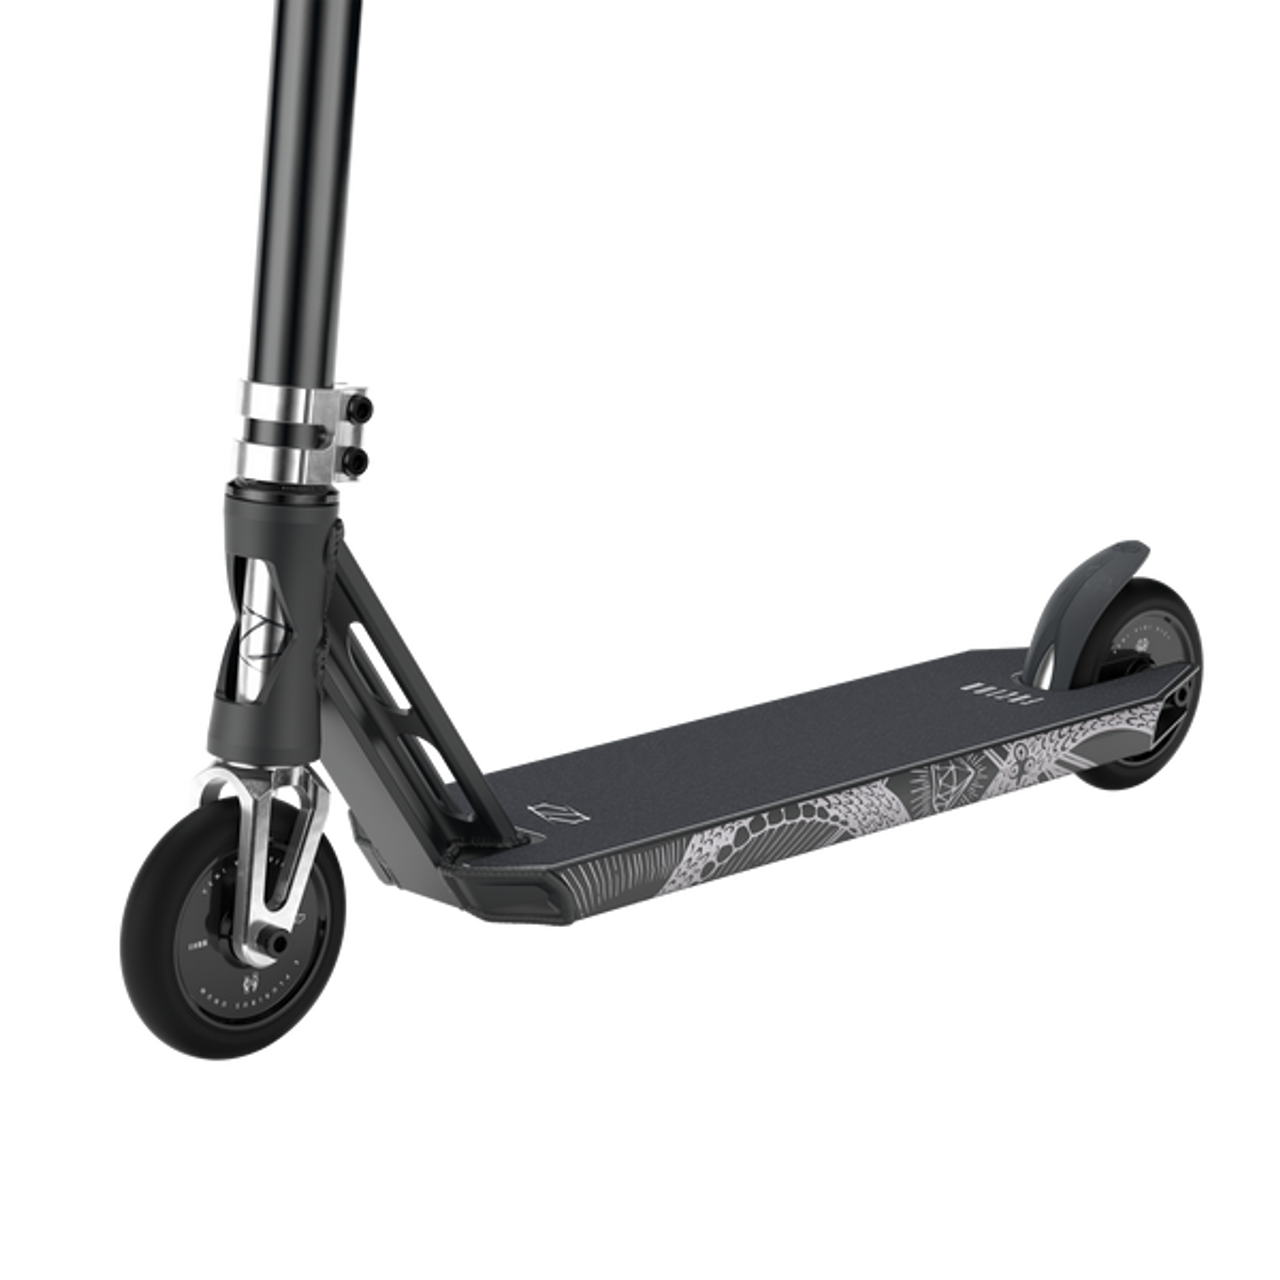 Tegn et billede Dovenskab Whitney Fuzion 2022 Z350 Complete Scooter - OC Pro Scooters